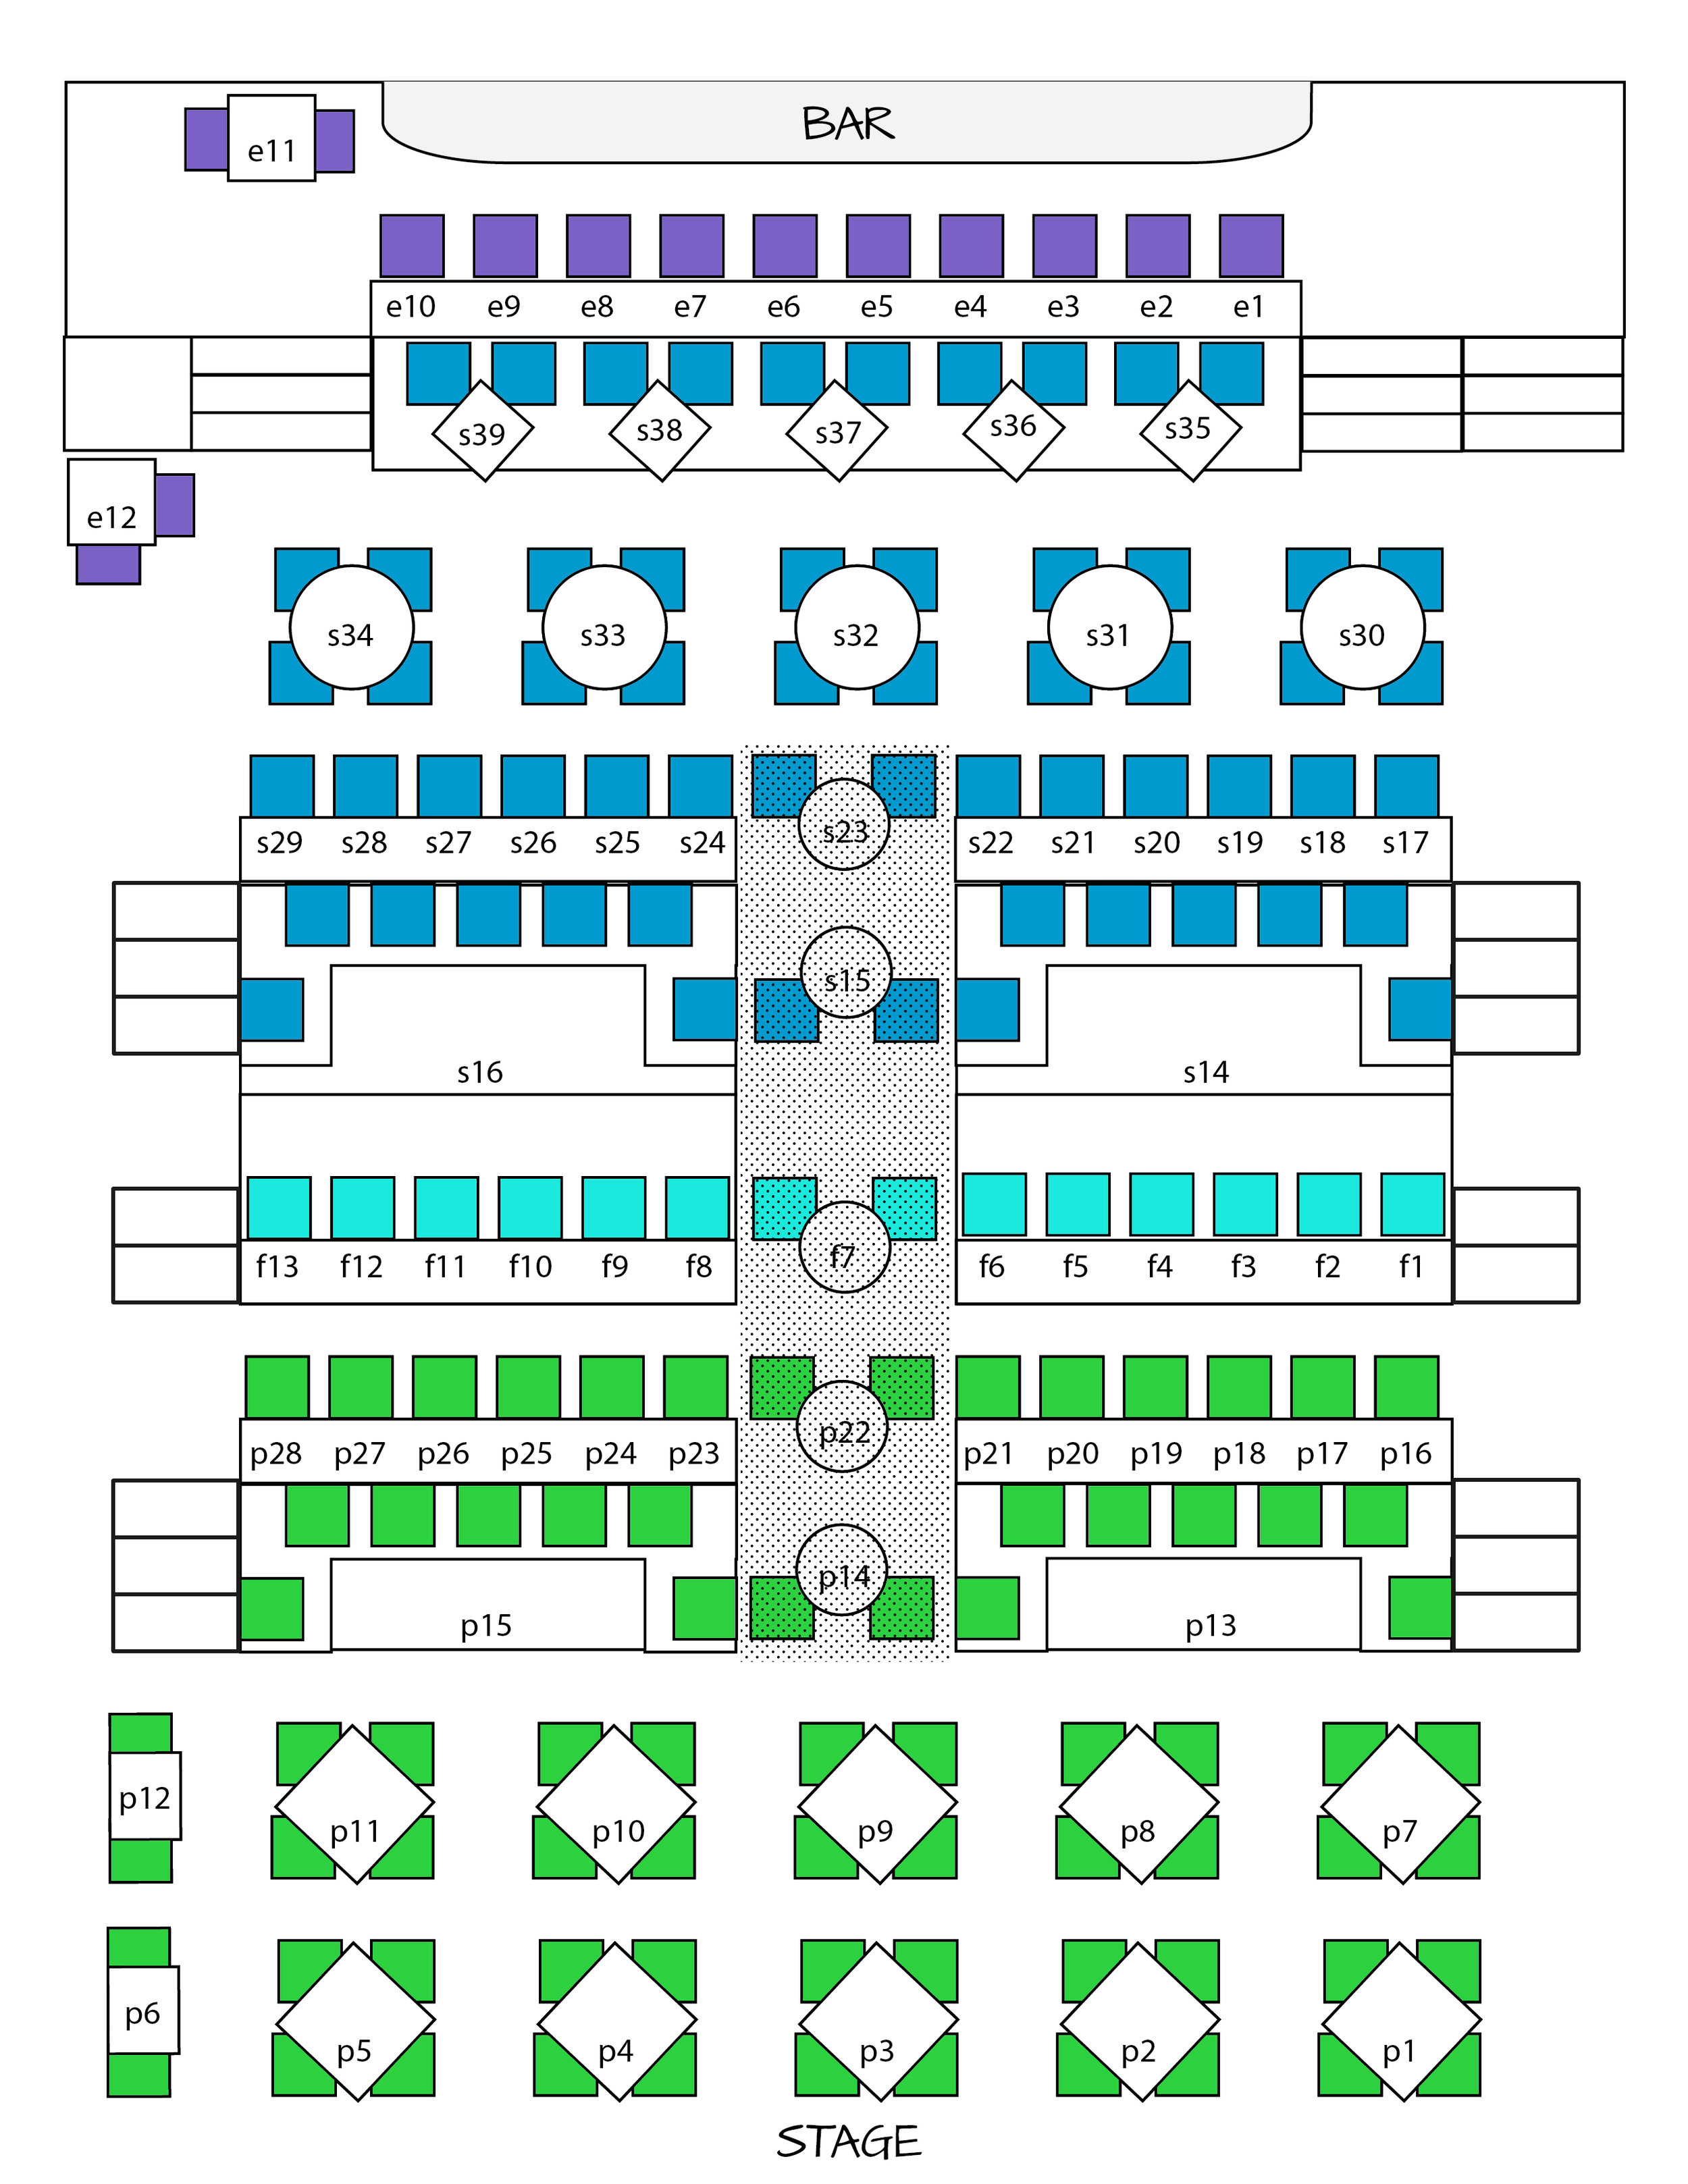 First Council Casino Seating Chart